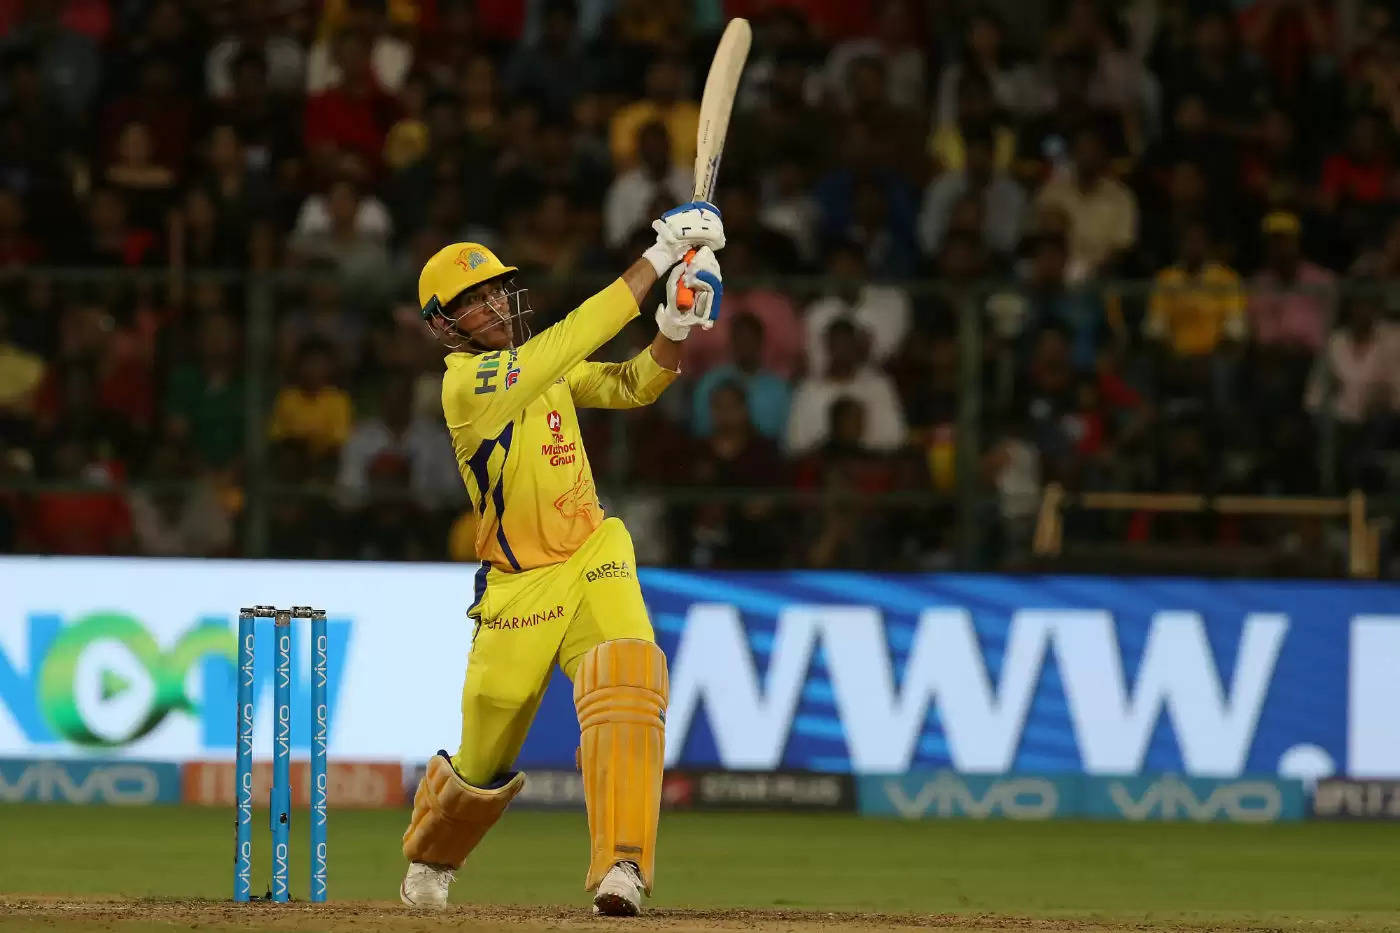 Dhoni will be retained by CSK in 2021: N Srinivasan